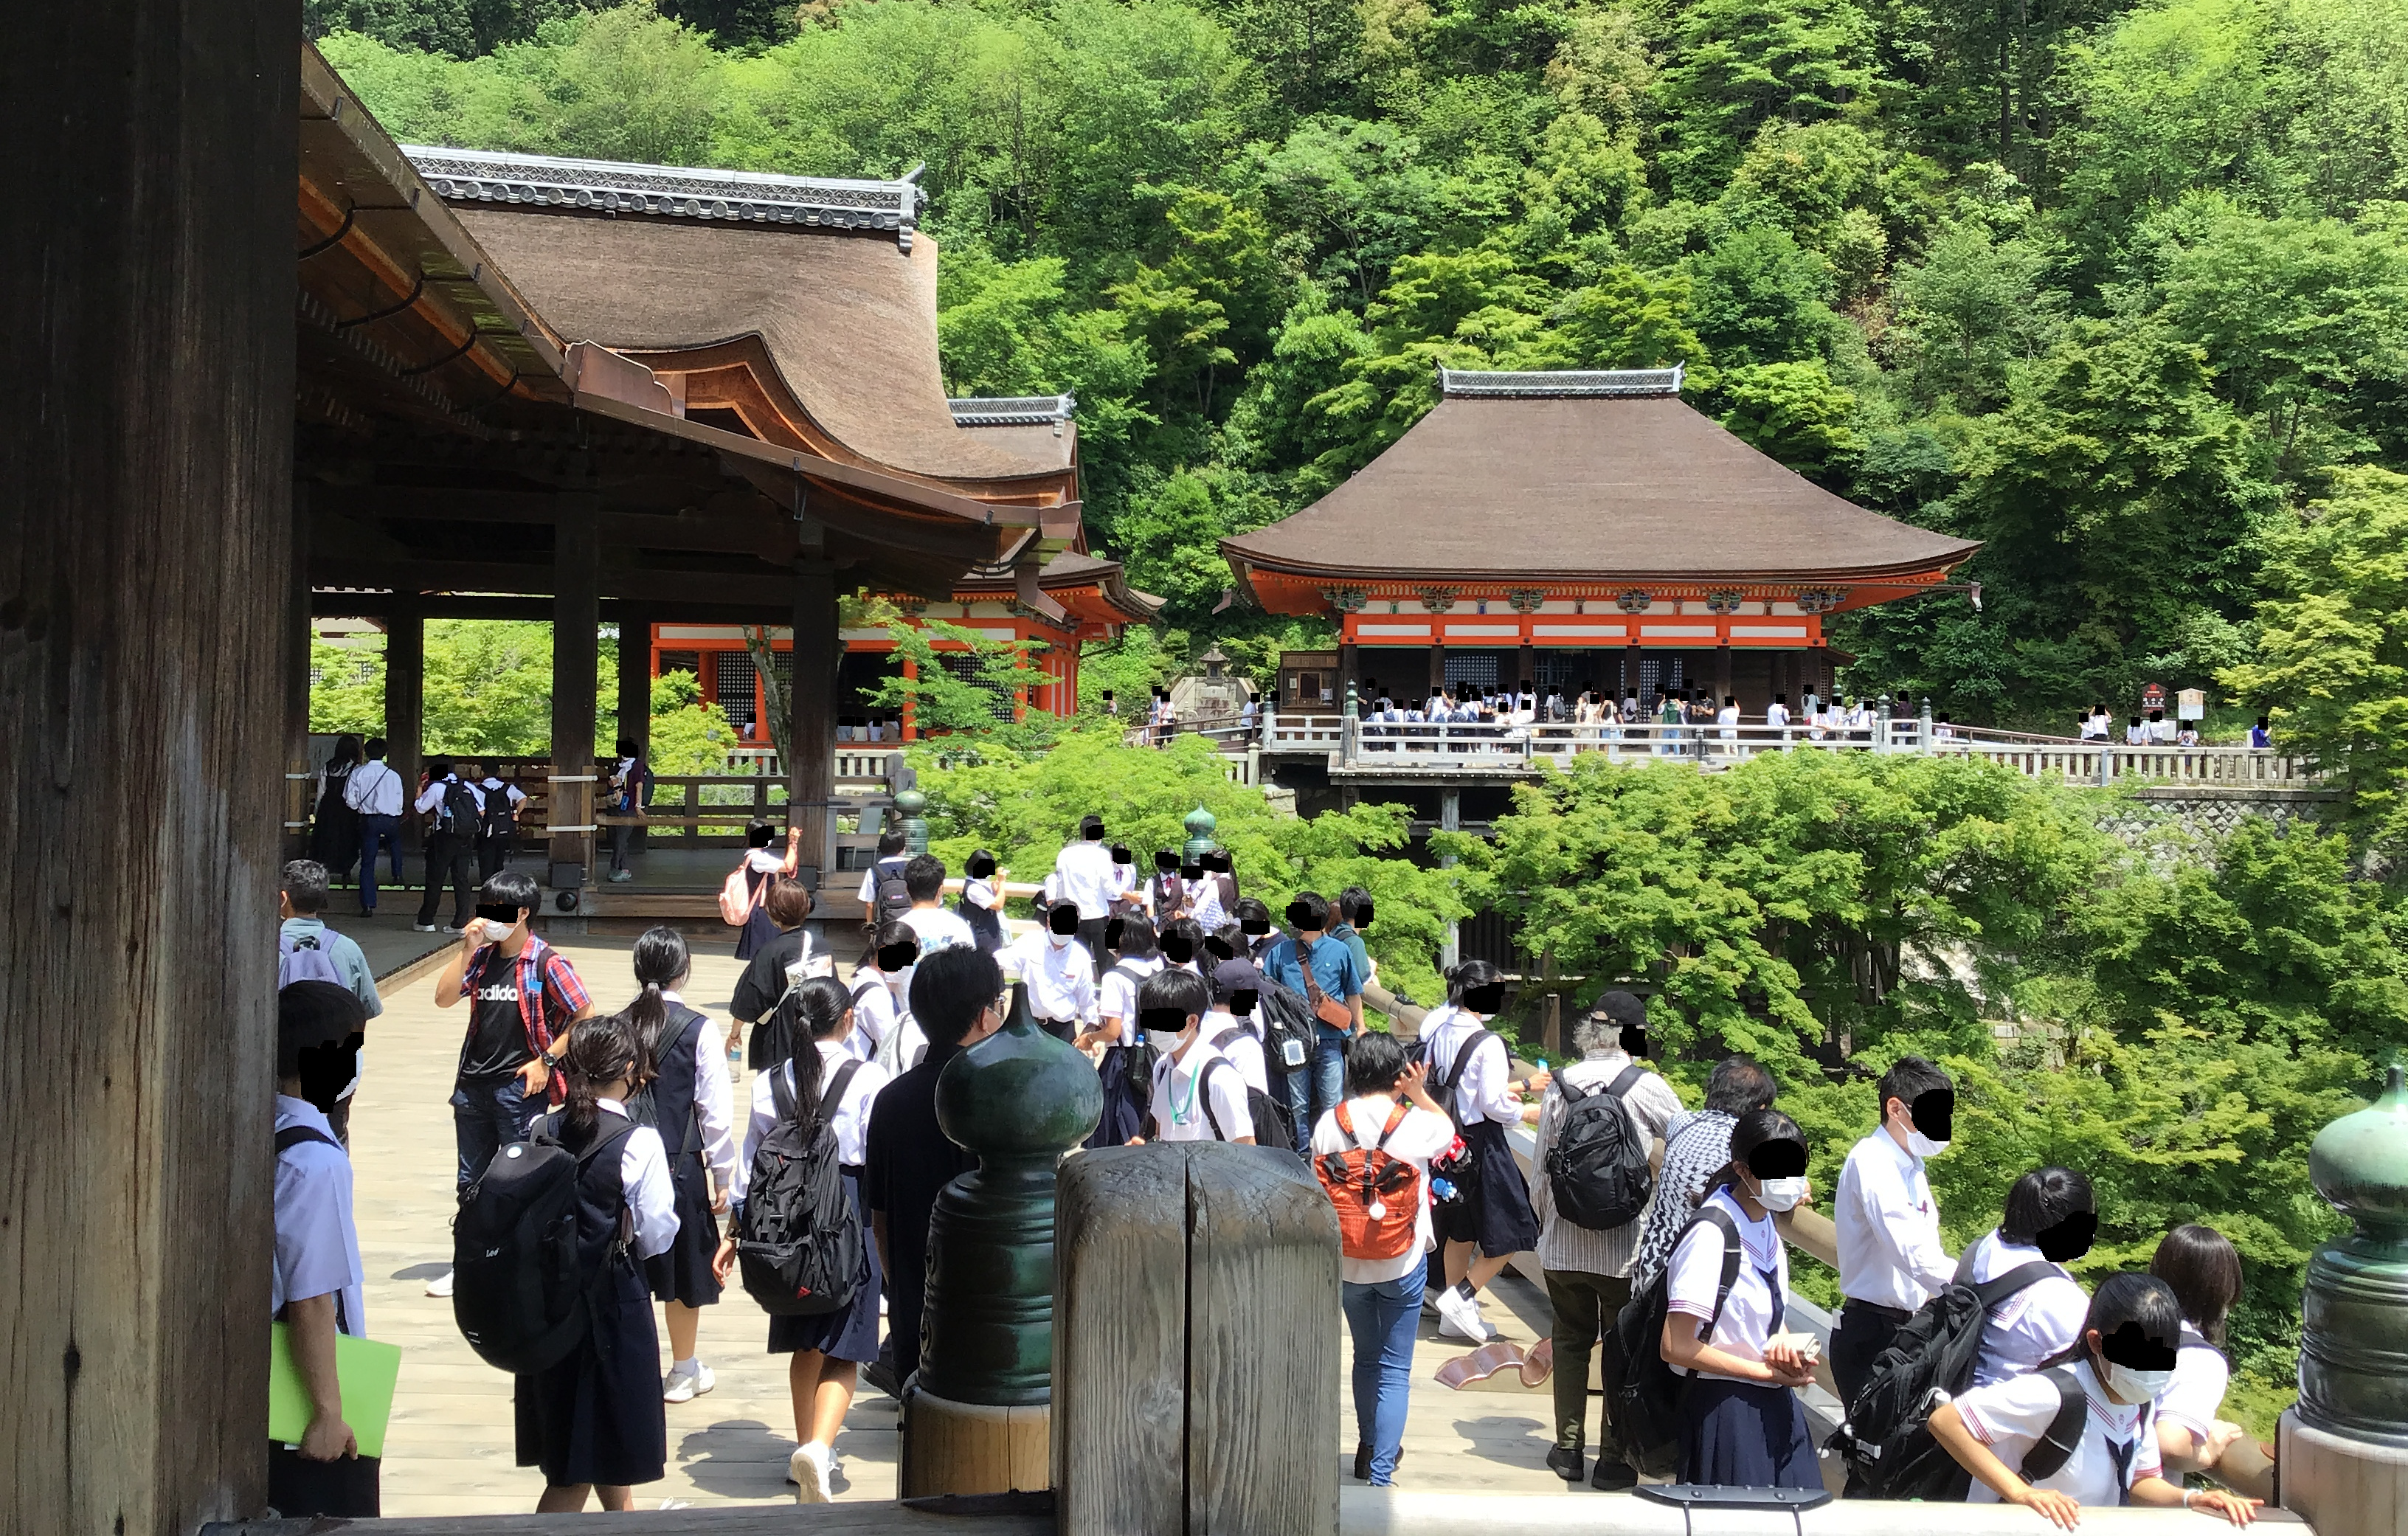 Shrine buildings with lots of visitors